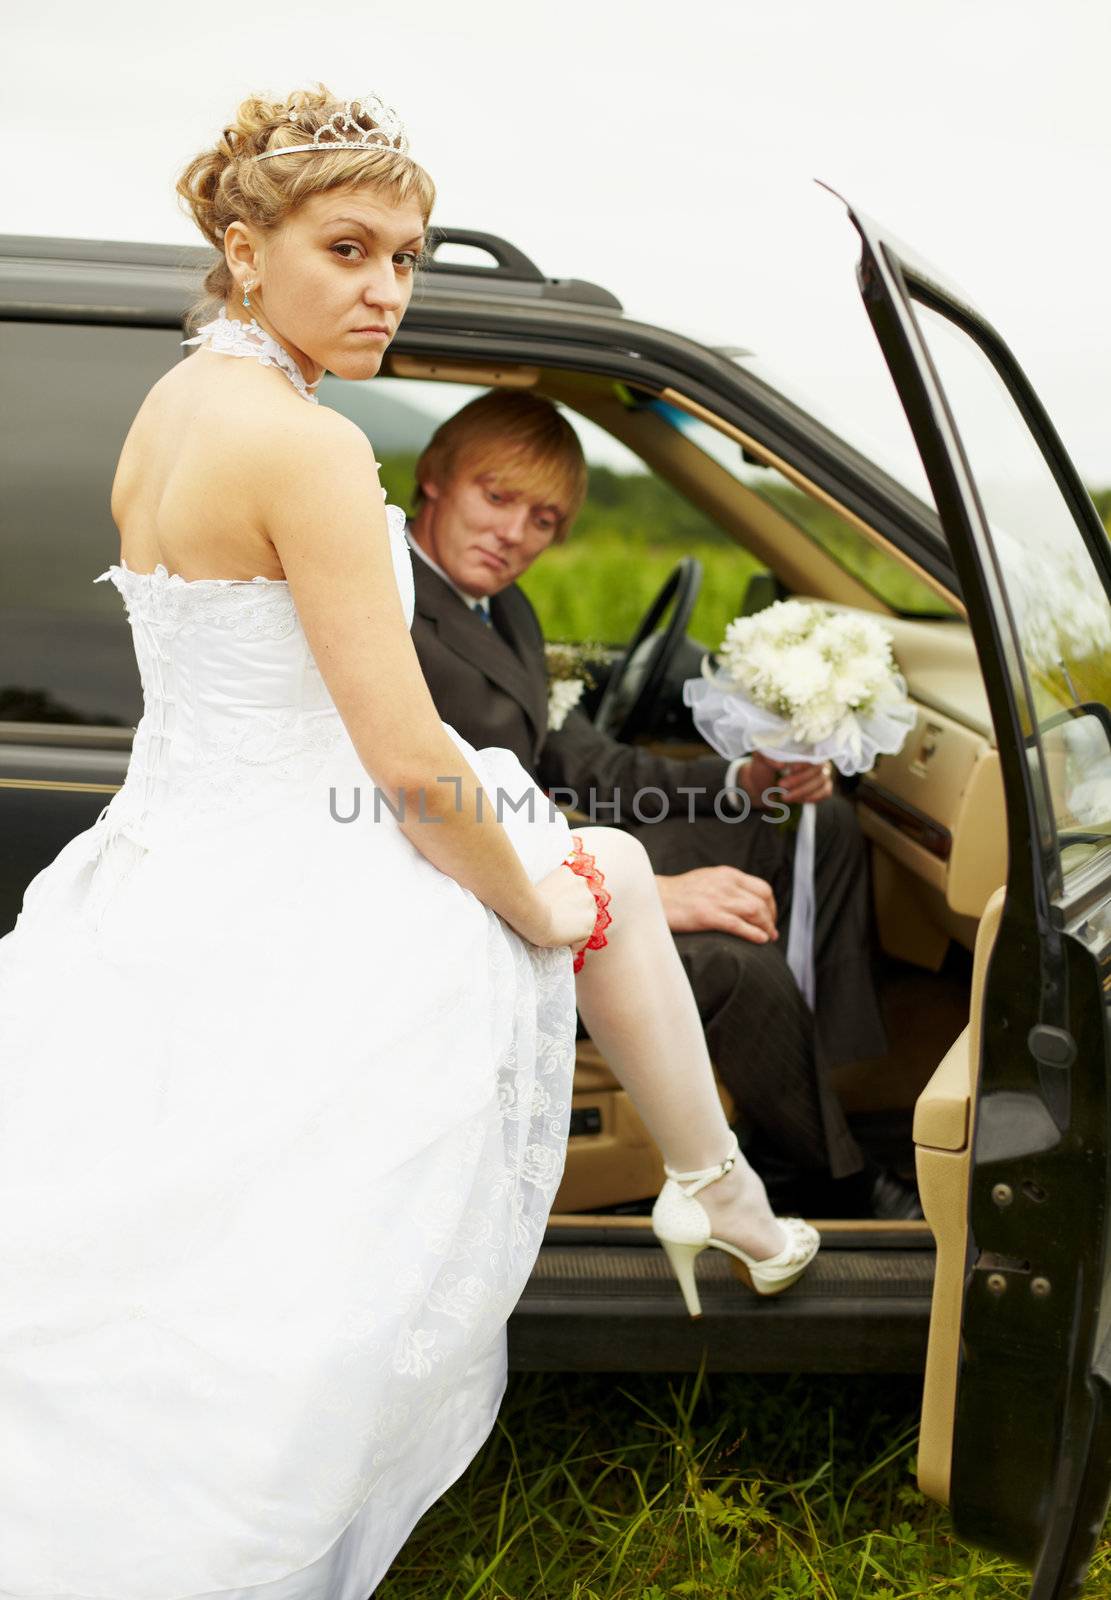 Sexual bride and groom in car by pzaxe